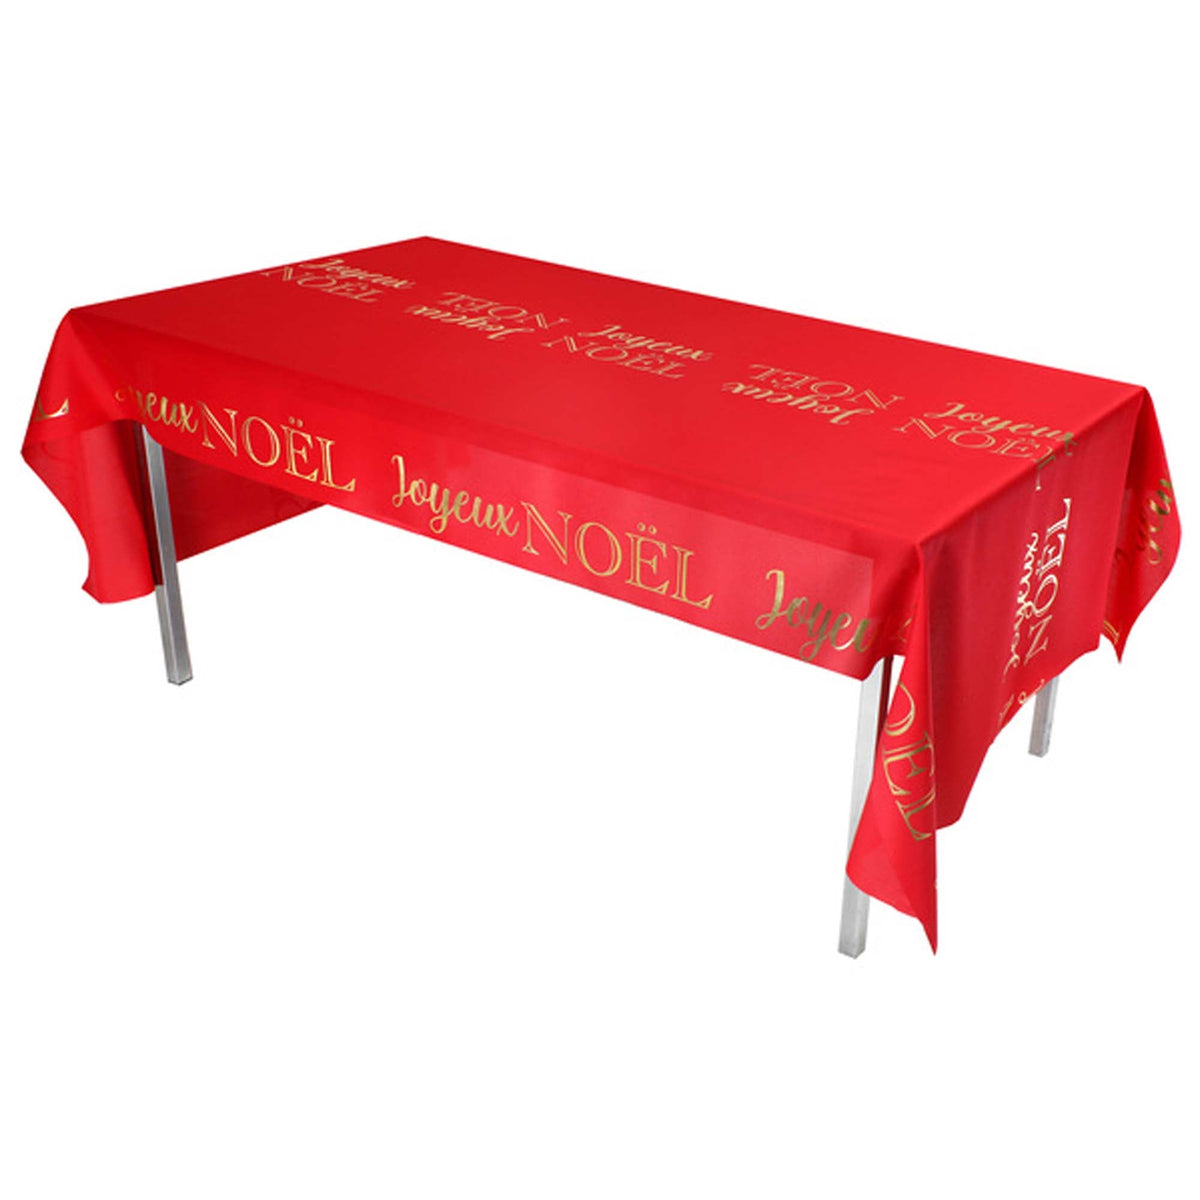 SANTEX Christmas Merry Christmas Red Plastic Table Cover, 40 x 80 Inches 3660380083740